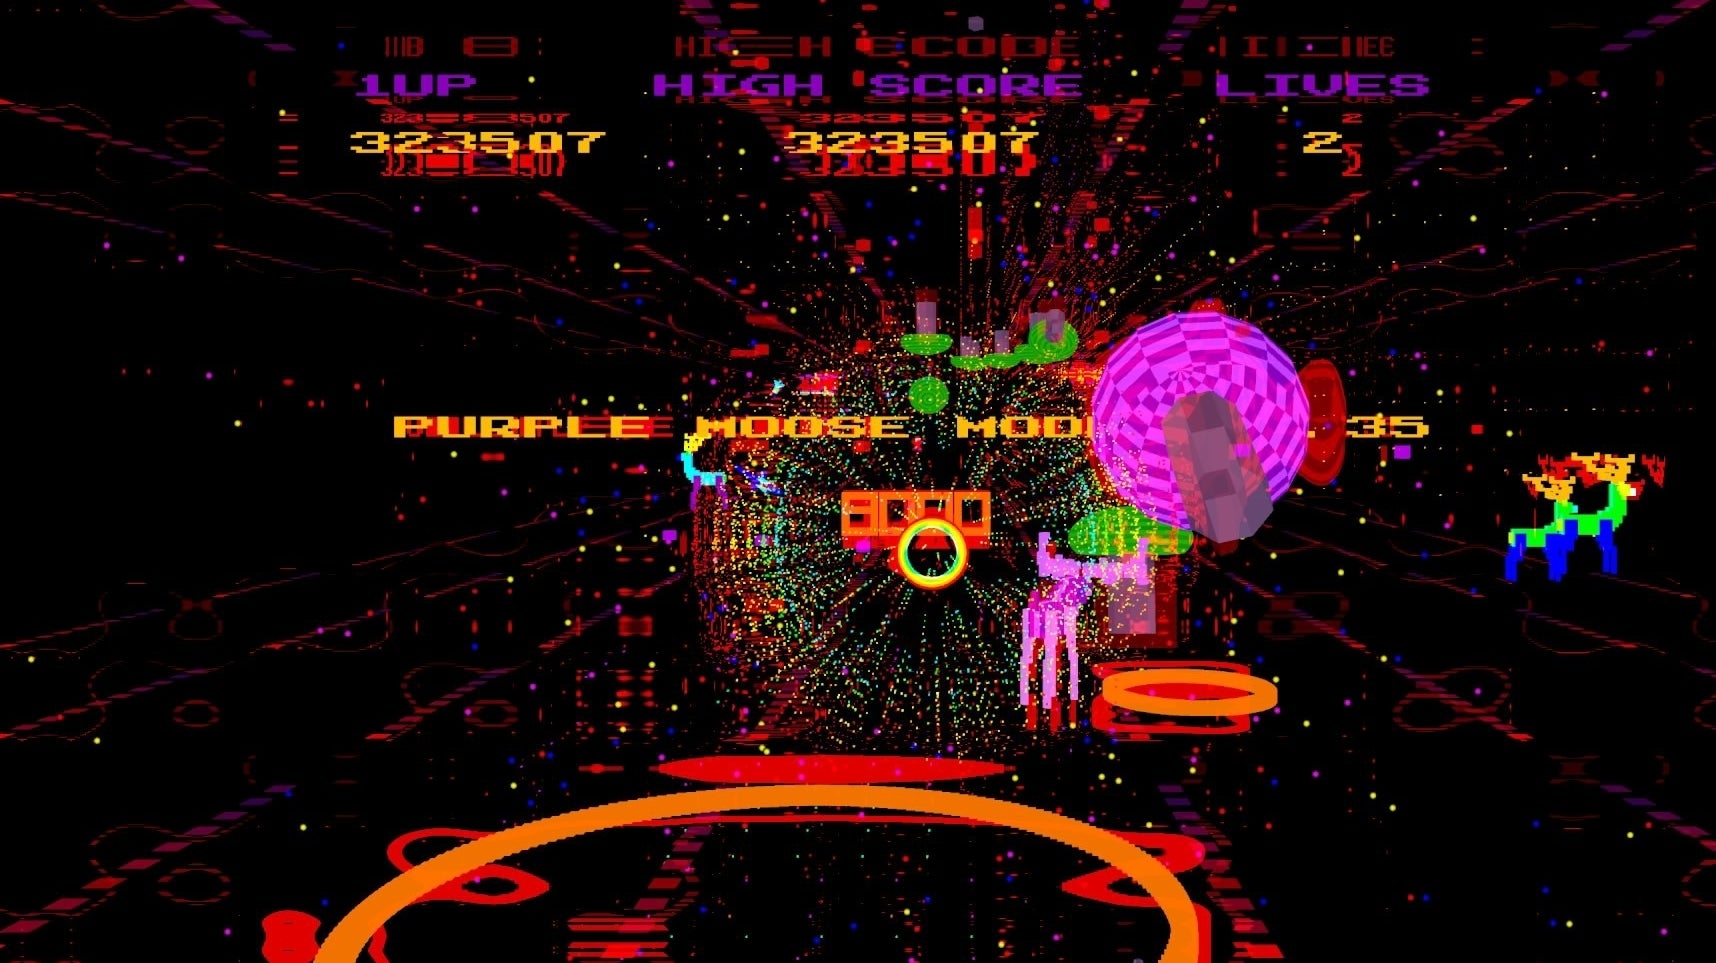 Image for Jeff Minter's latest psychedelic arcade shooter Moose Life comes to PC in August